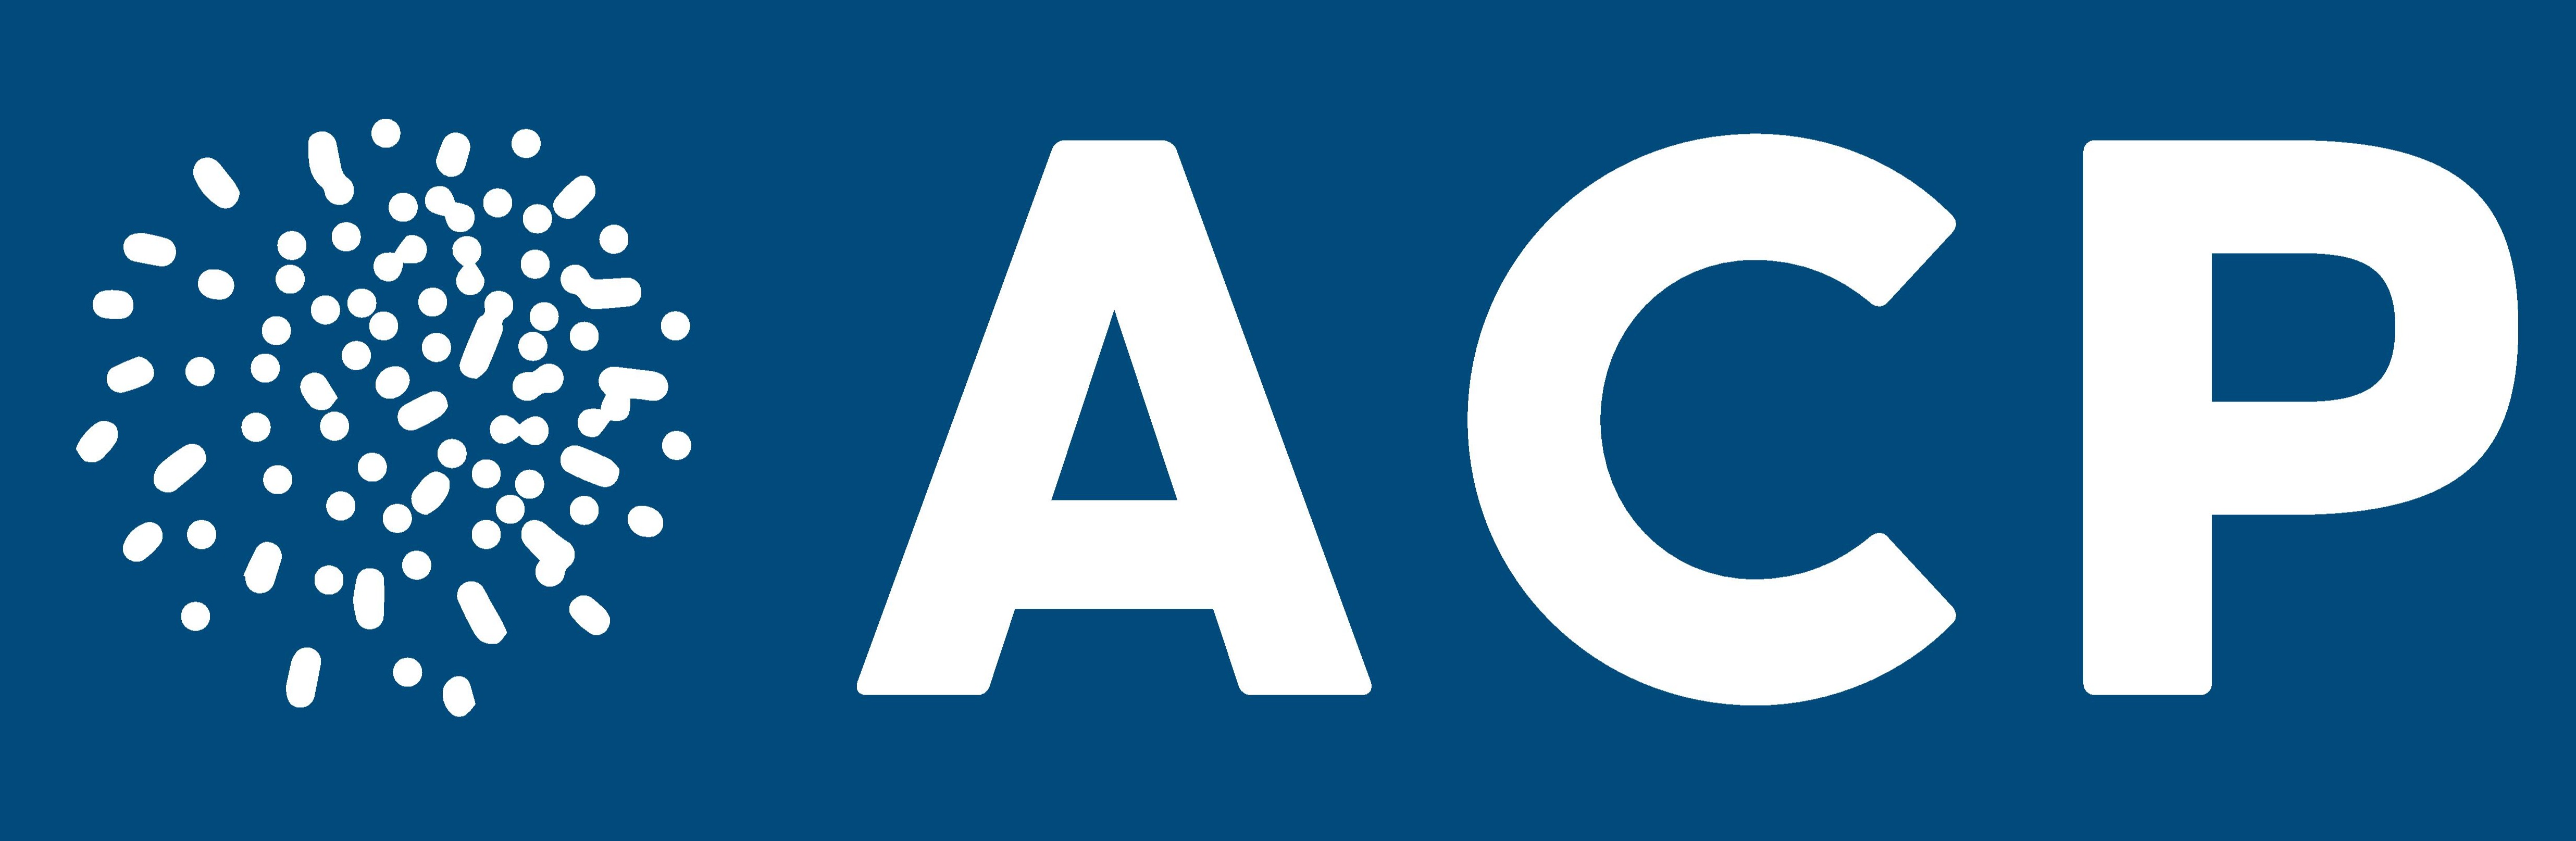 All Care Products (ACP) Logo